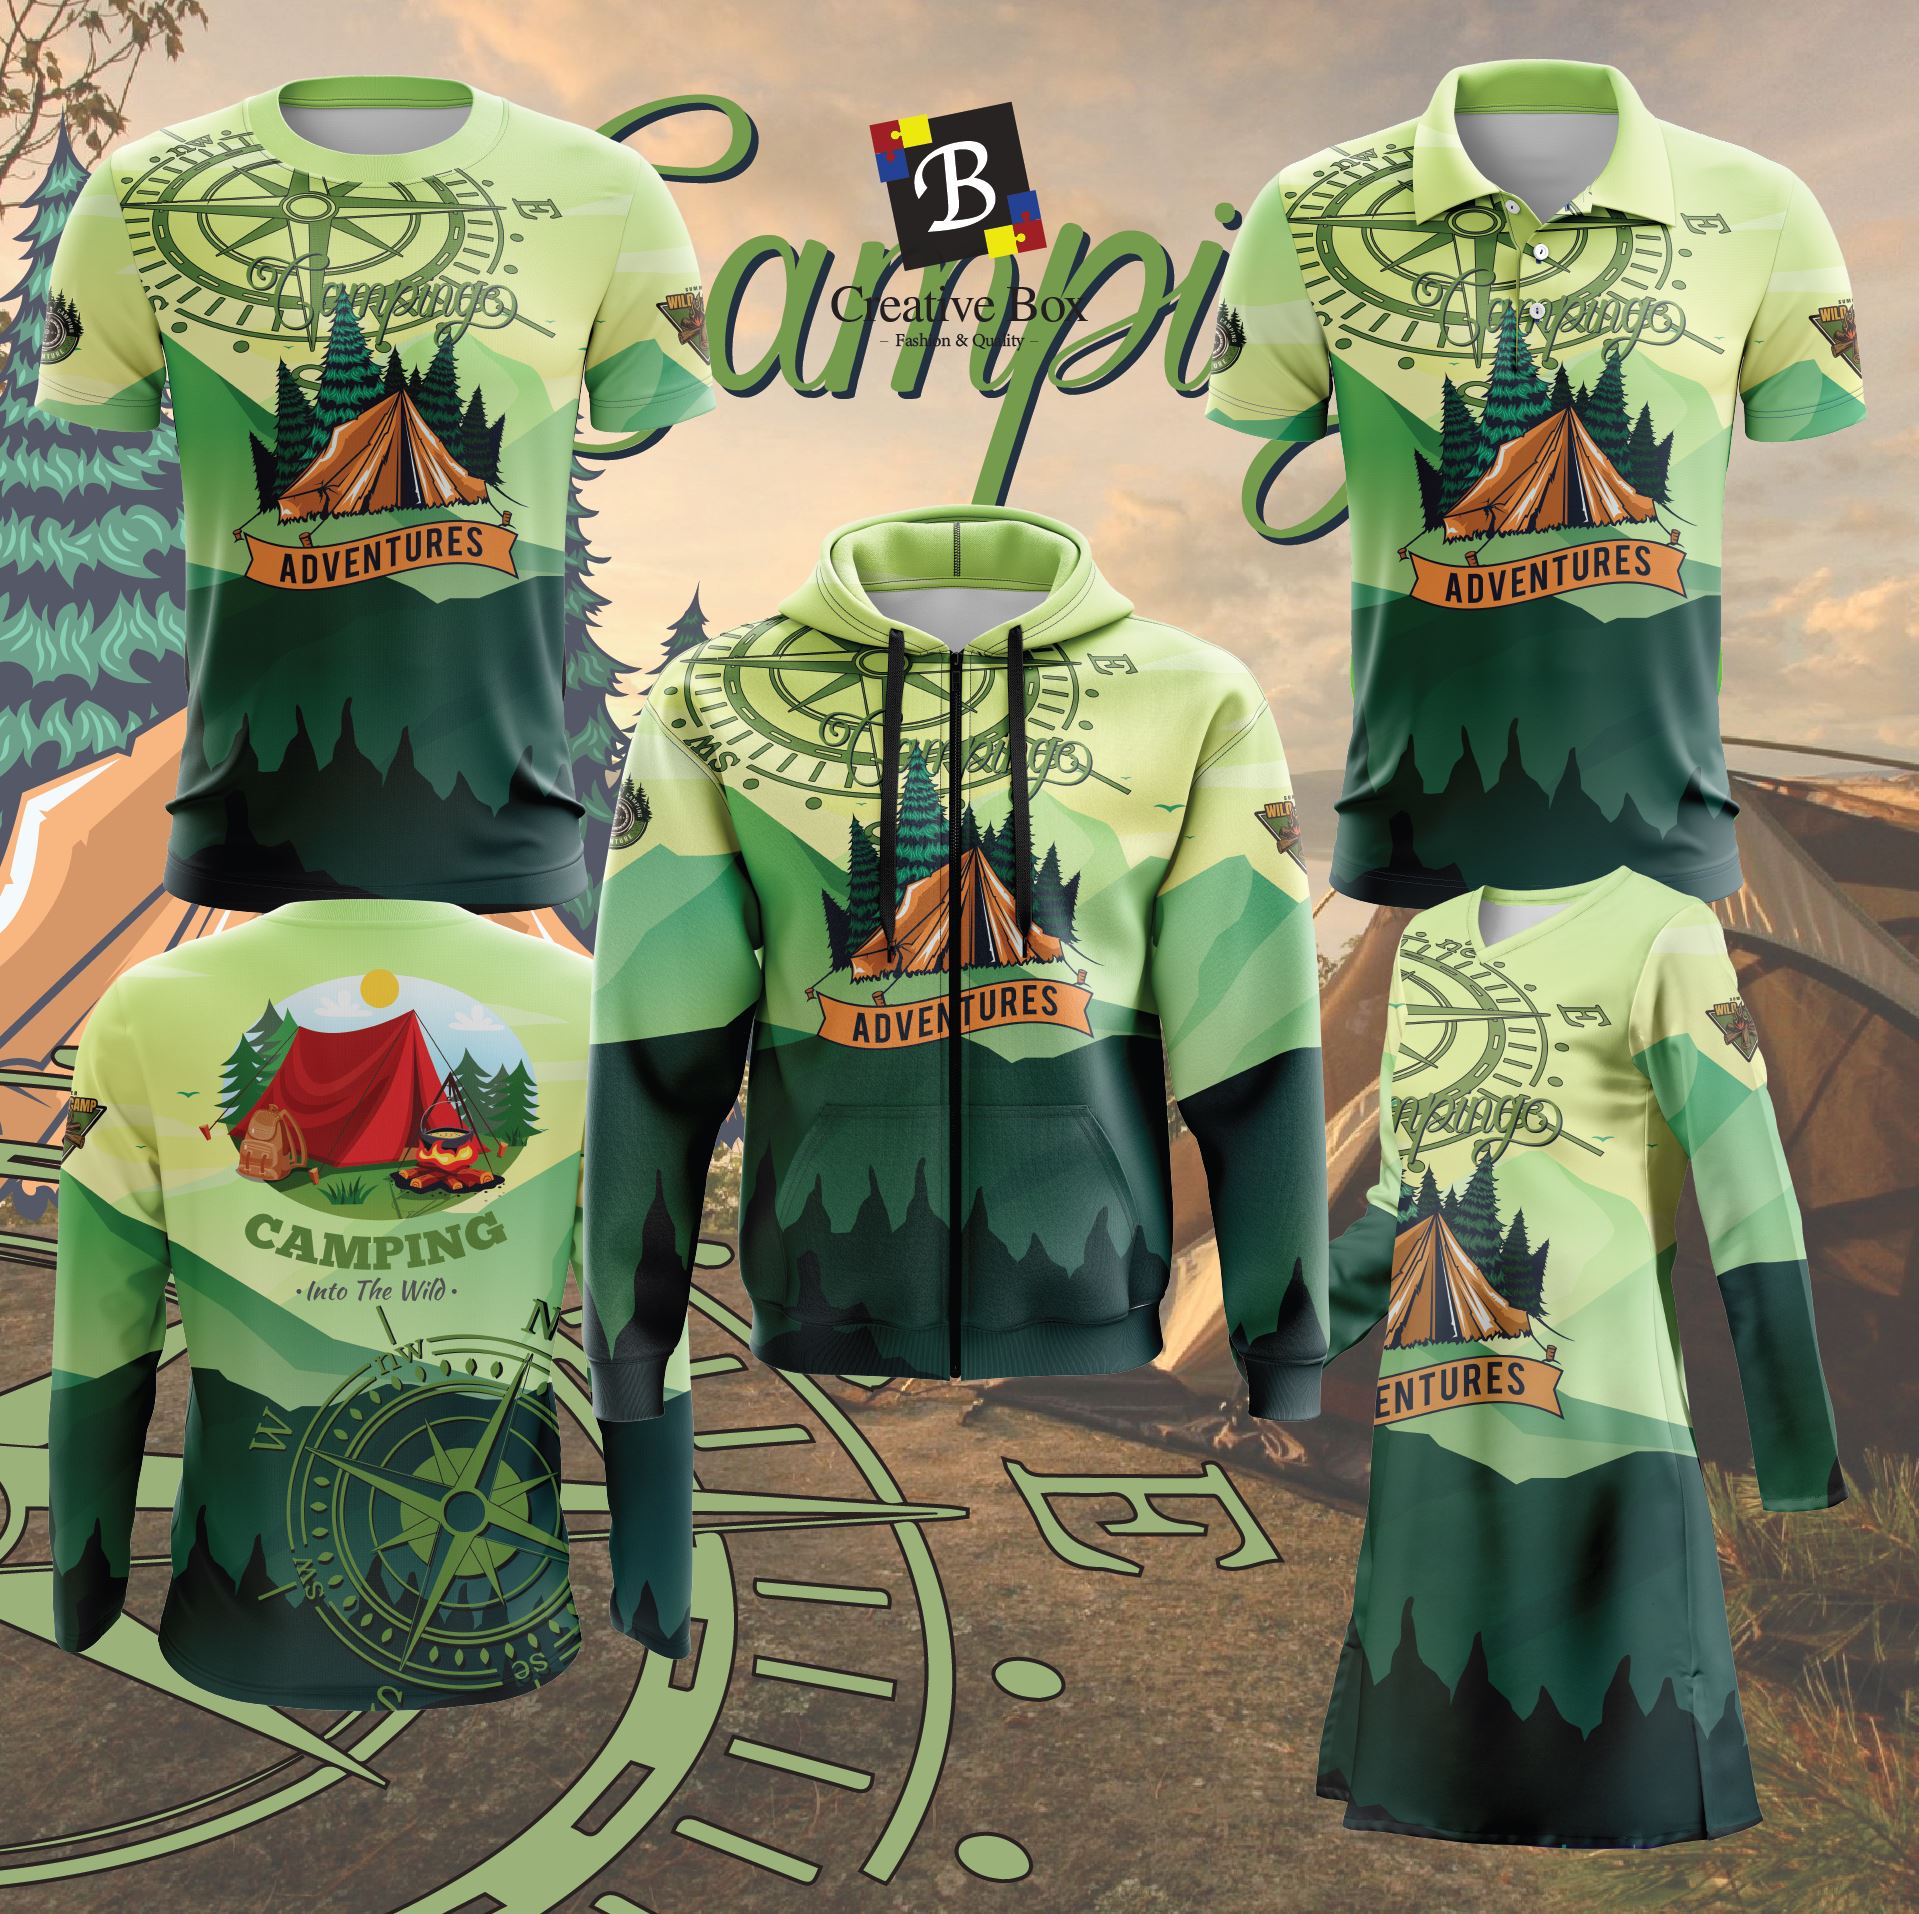 Limited Edition Camping Jersey and Jacket #01